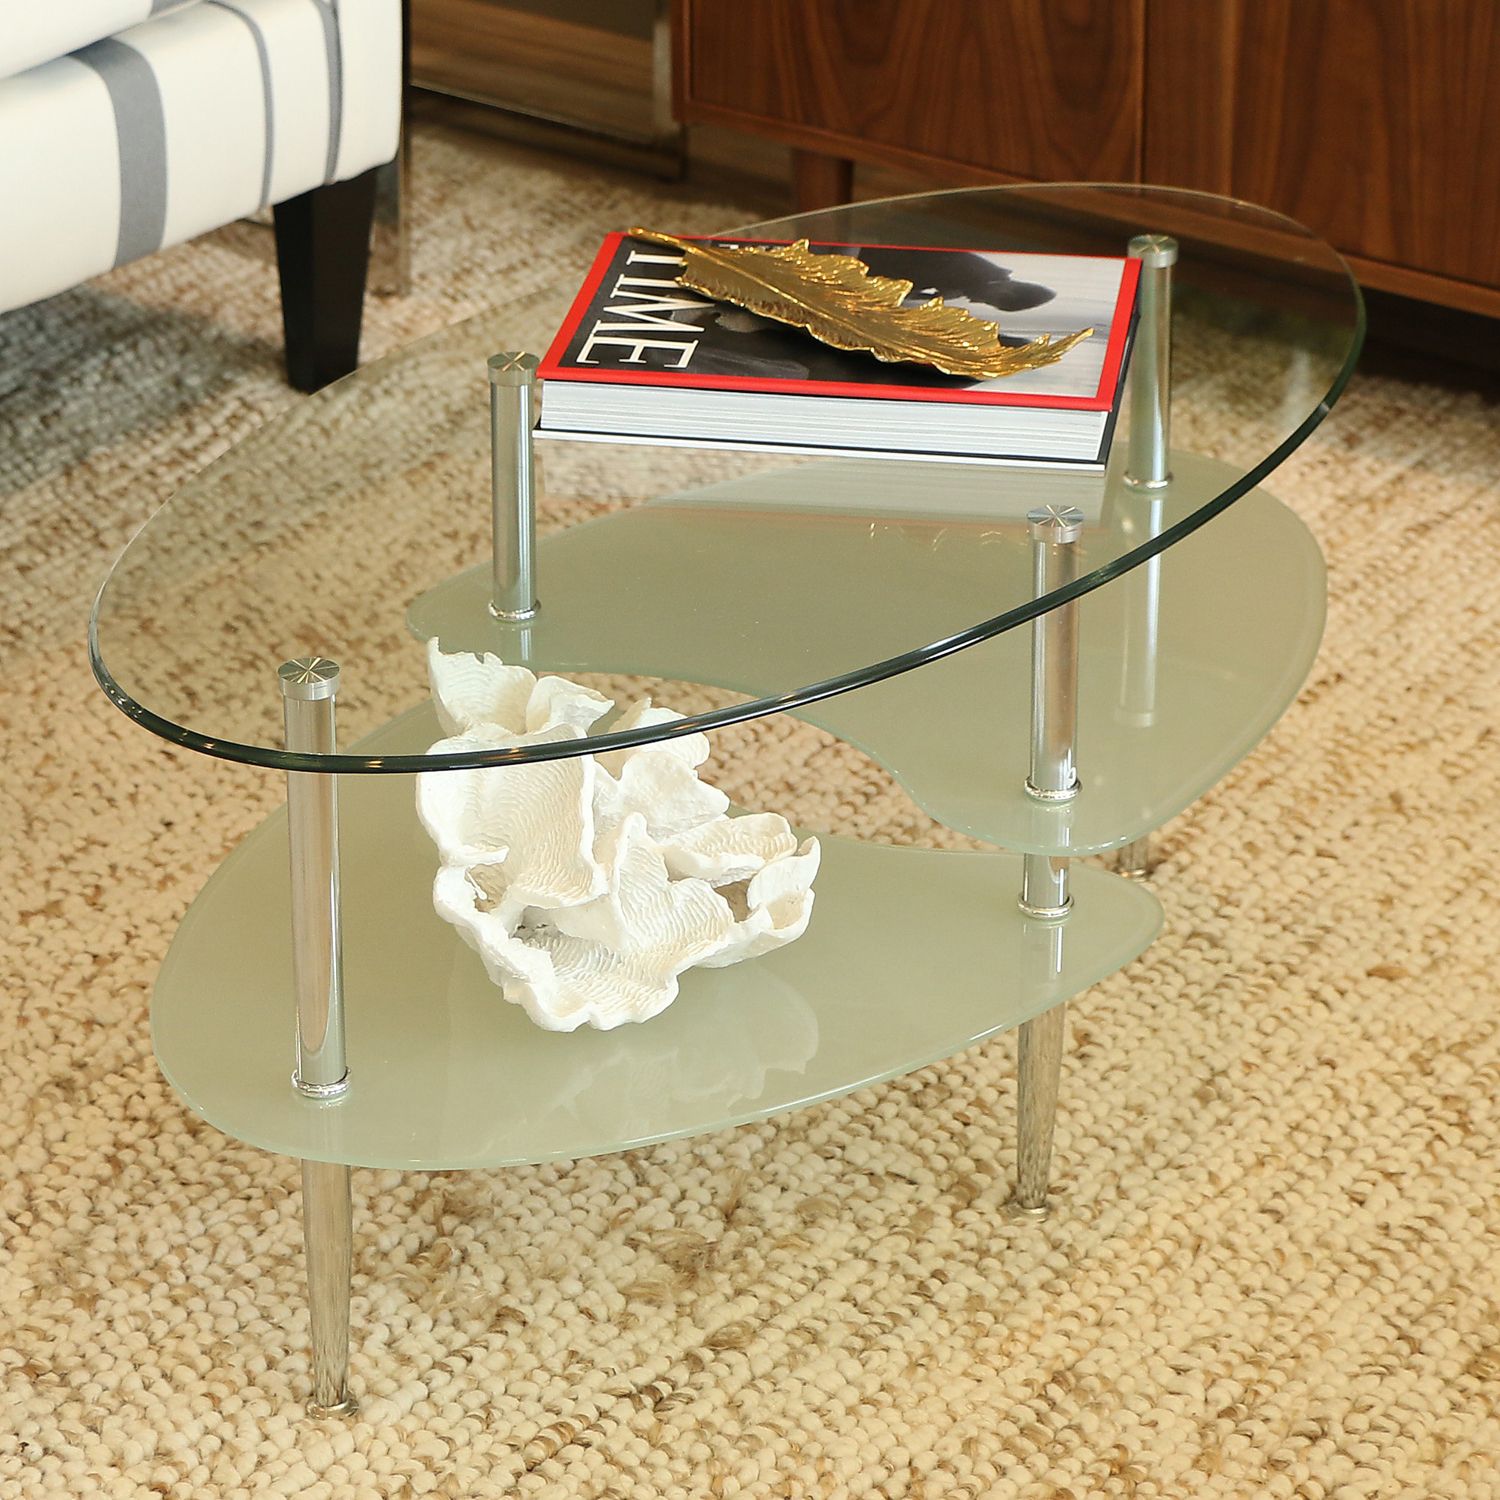 Oval Glass Coffee Table With Chrome Legs – Pier1 Imports In Oval Glass Coffee Tables (View 9 of 15)